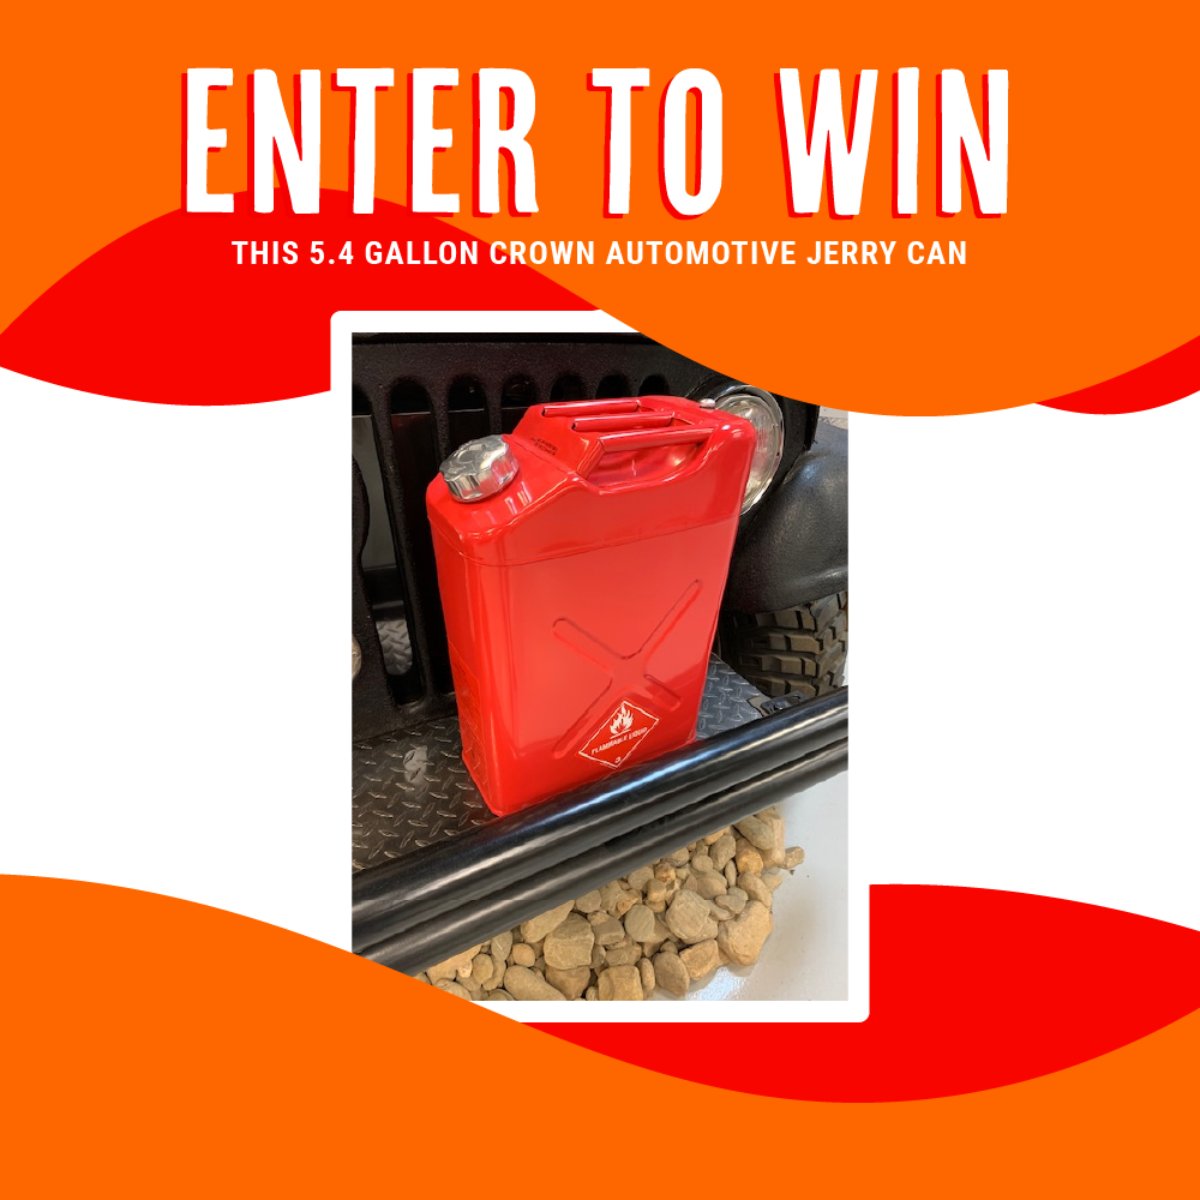 From now through Feb. 27, you can enter for the chance to win this 5.4-gallon Crown Automotive Jerry Can! Visit our Facebook page to enter.